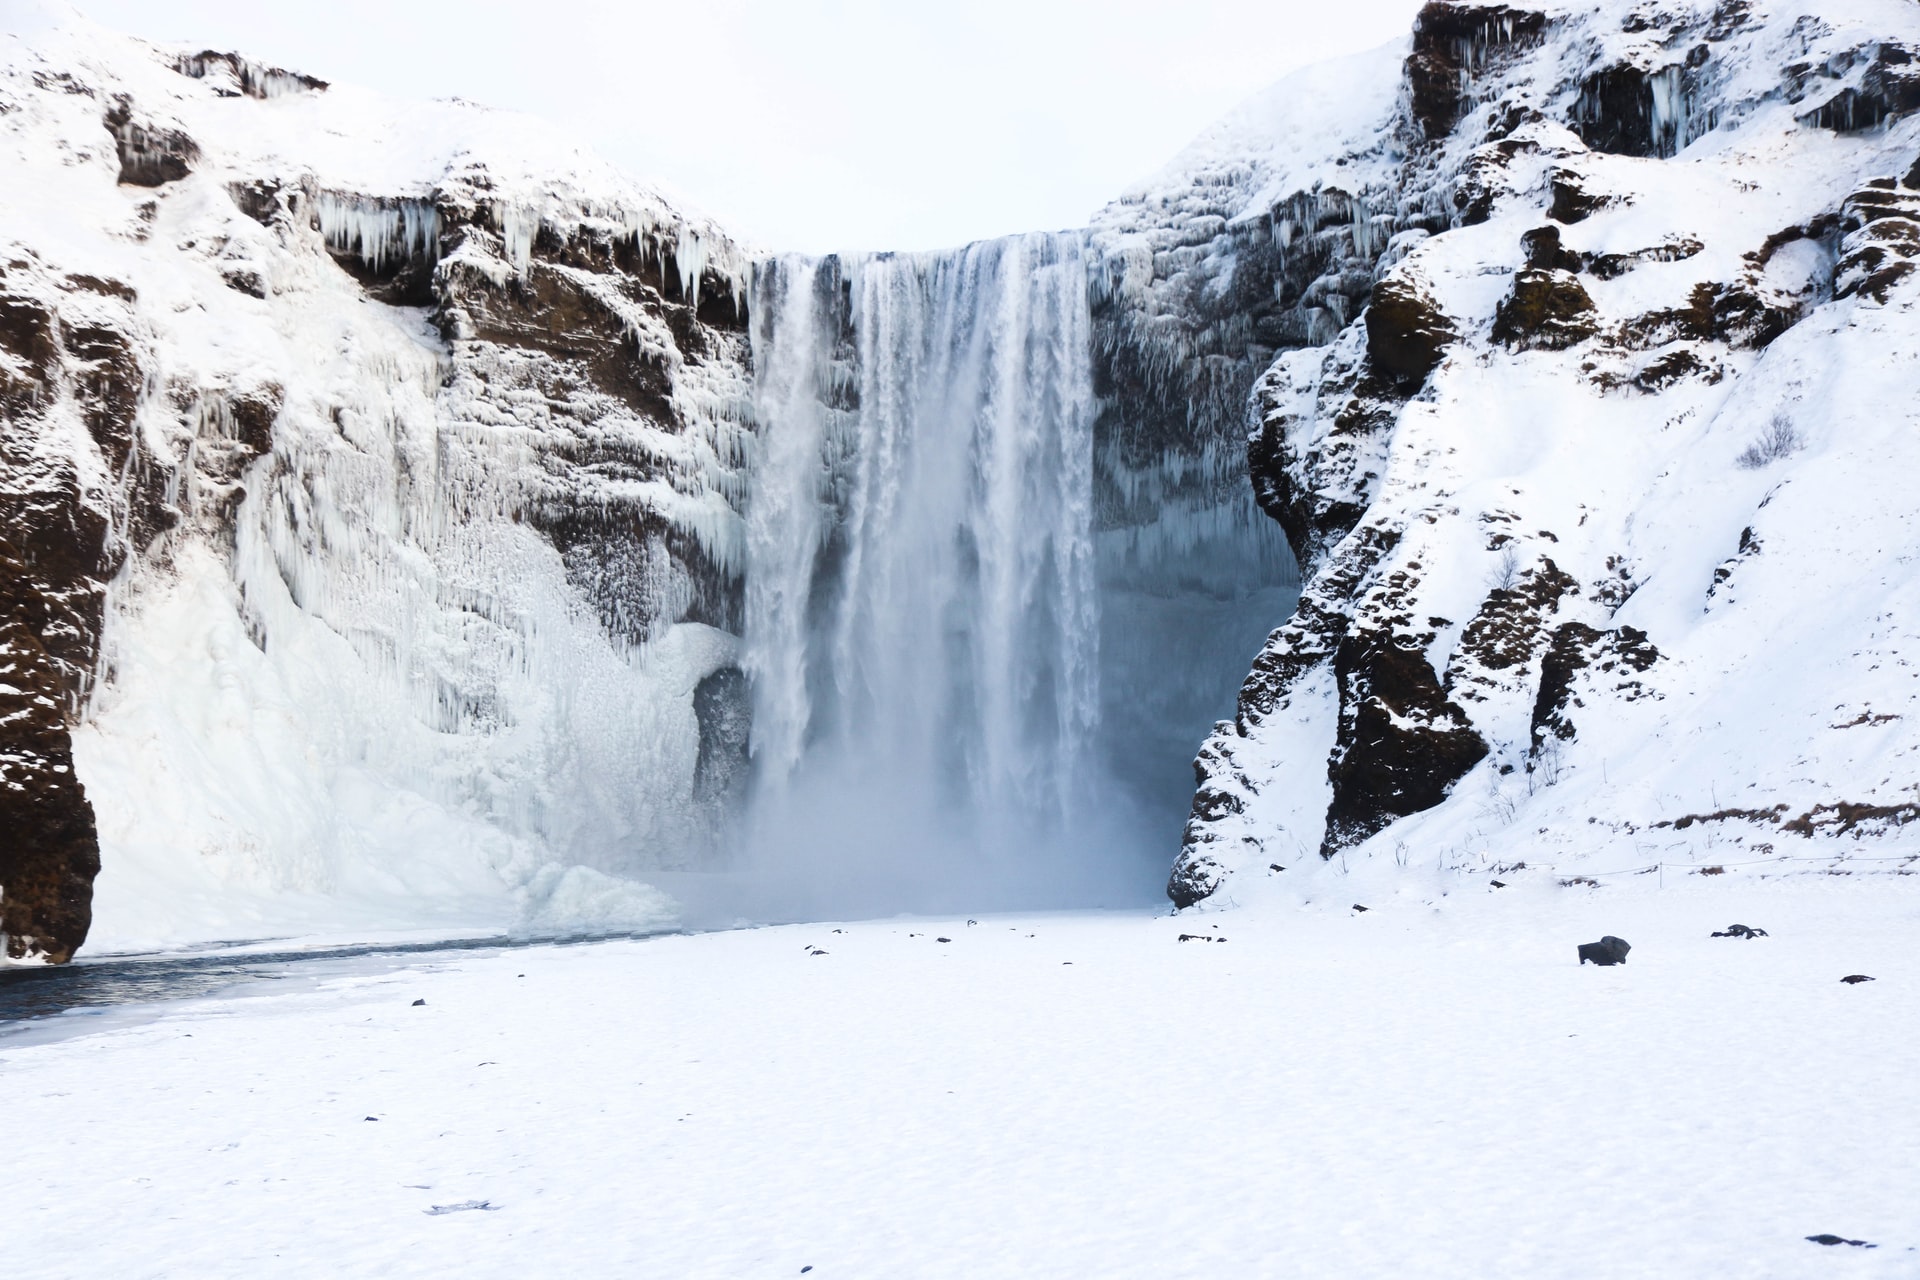 Things to do in Iceland’s winter